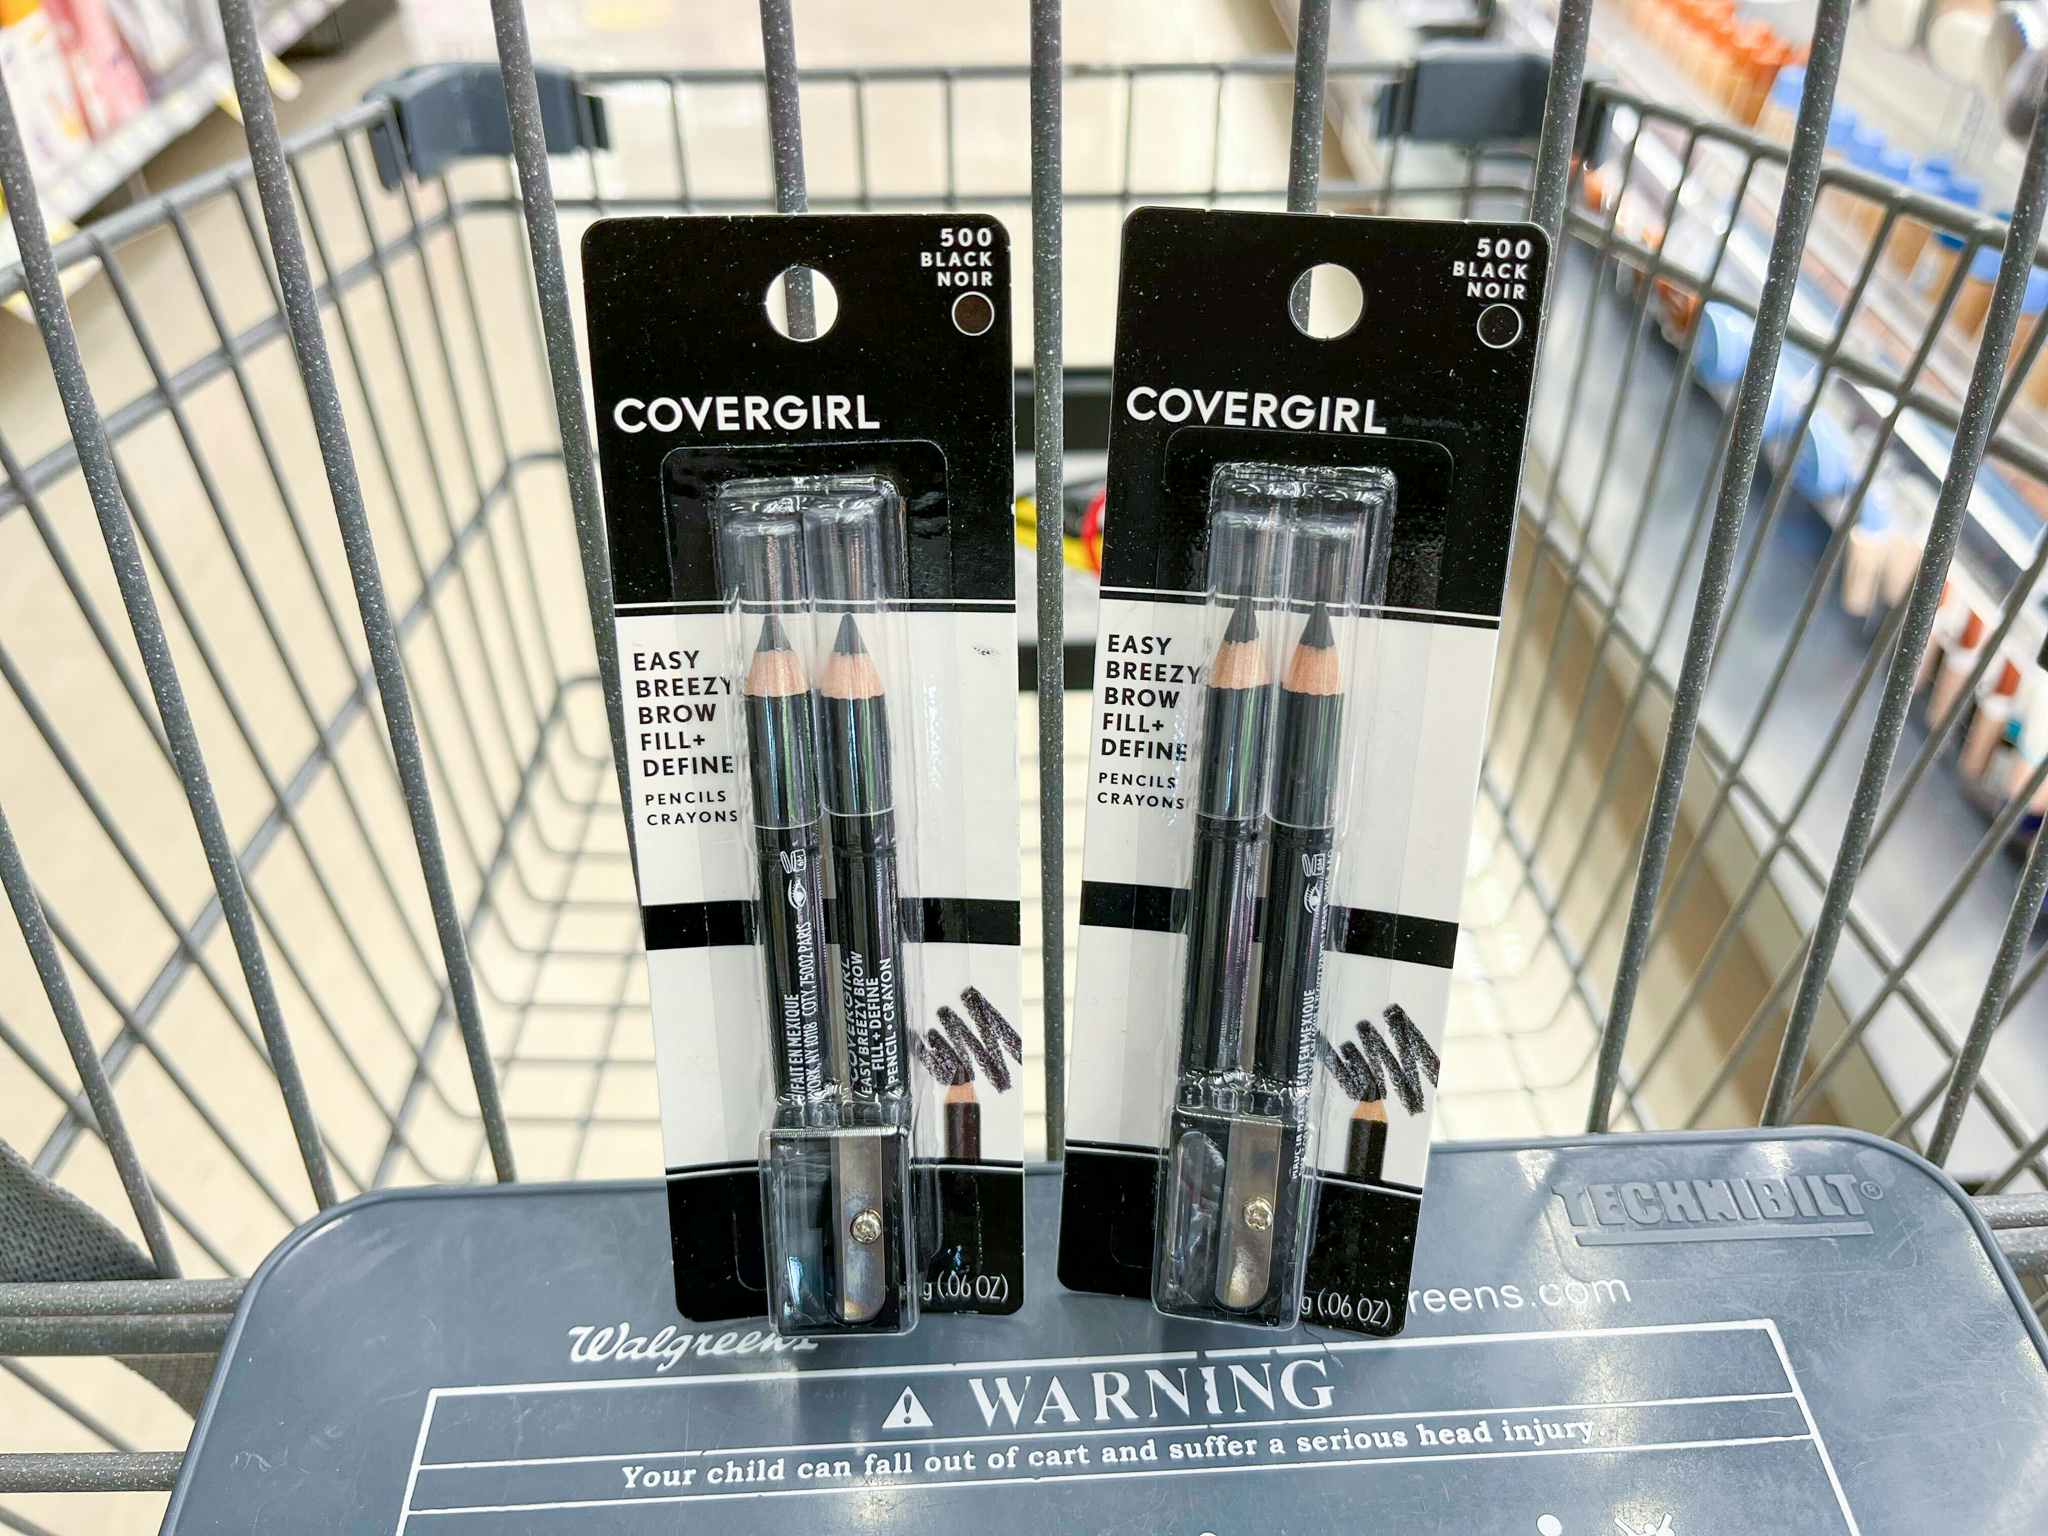 two packages of covergirl eyebrow pencils in shopping cart